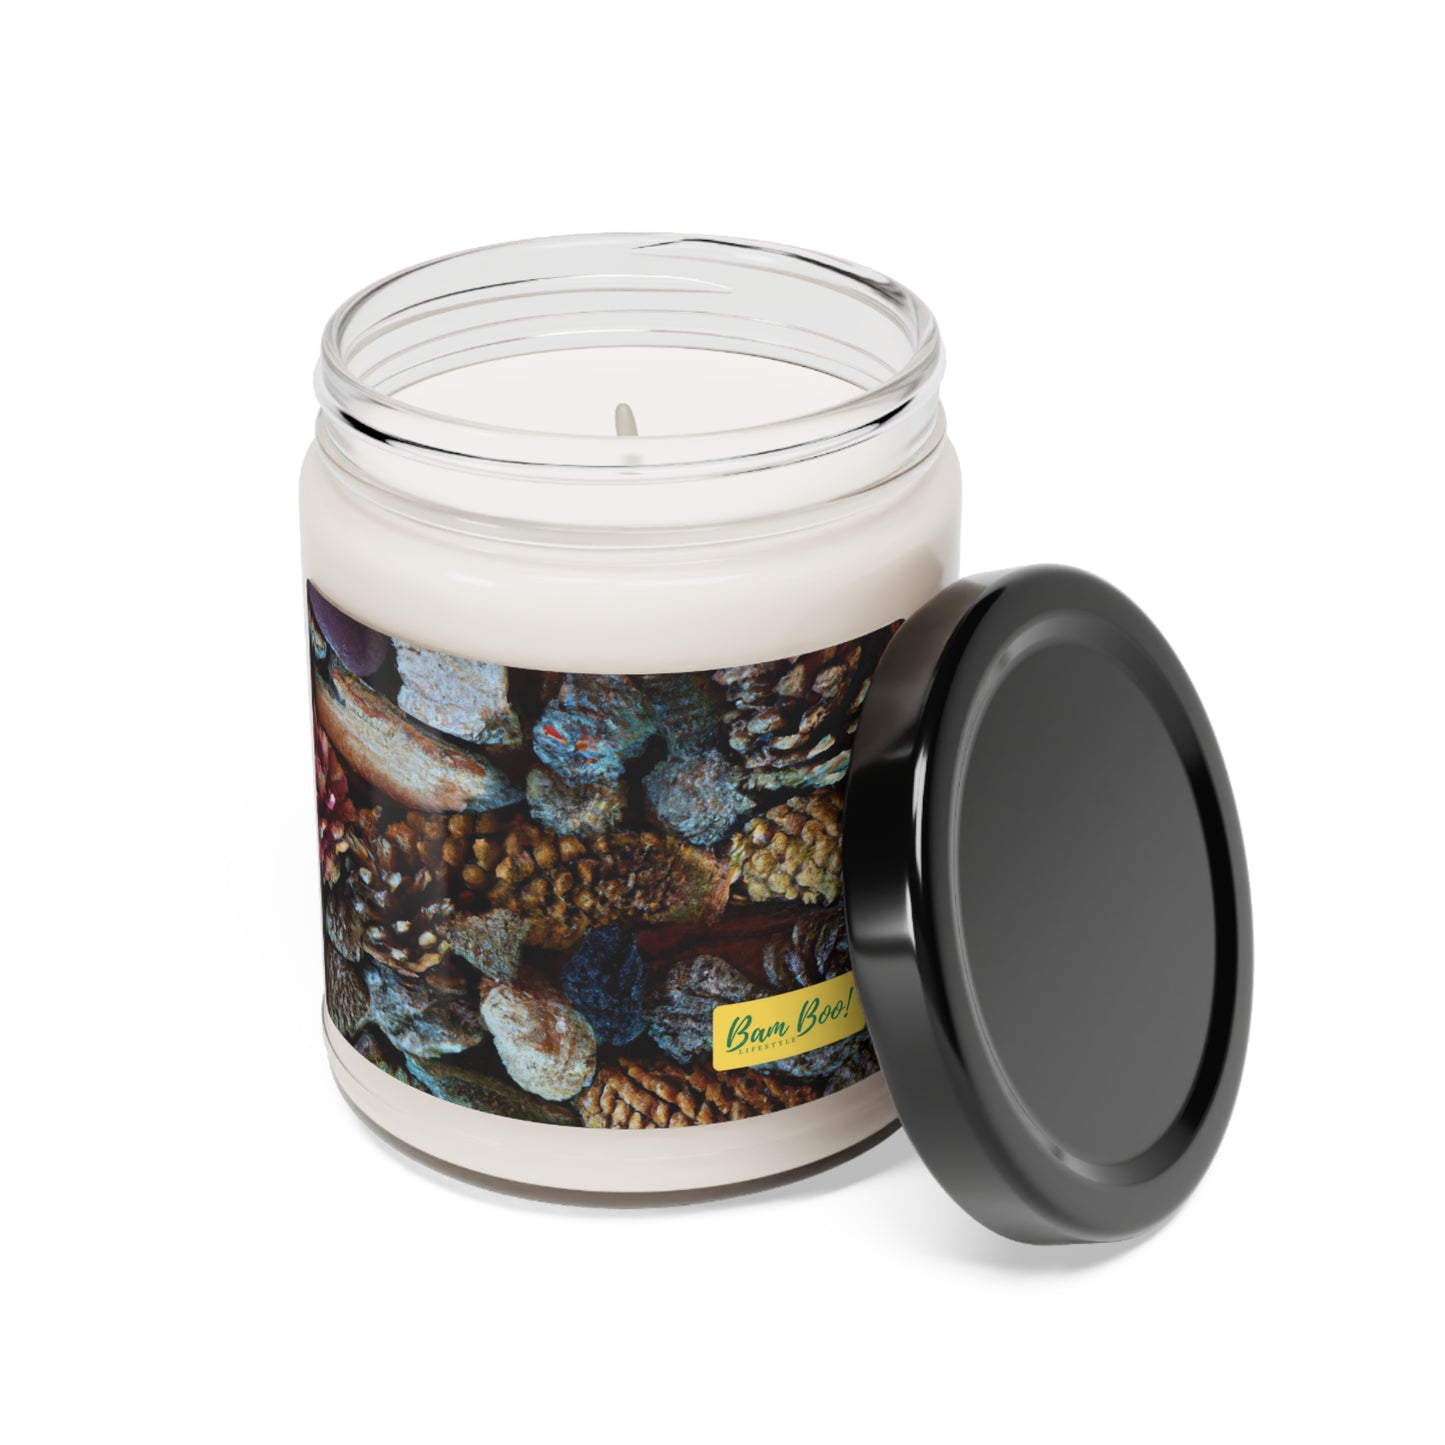 "Earthly Expressions: An Artistic Journey through Nature" - Bam Boo! Lifestyle Eco-friendly Soy Candle